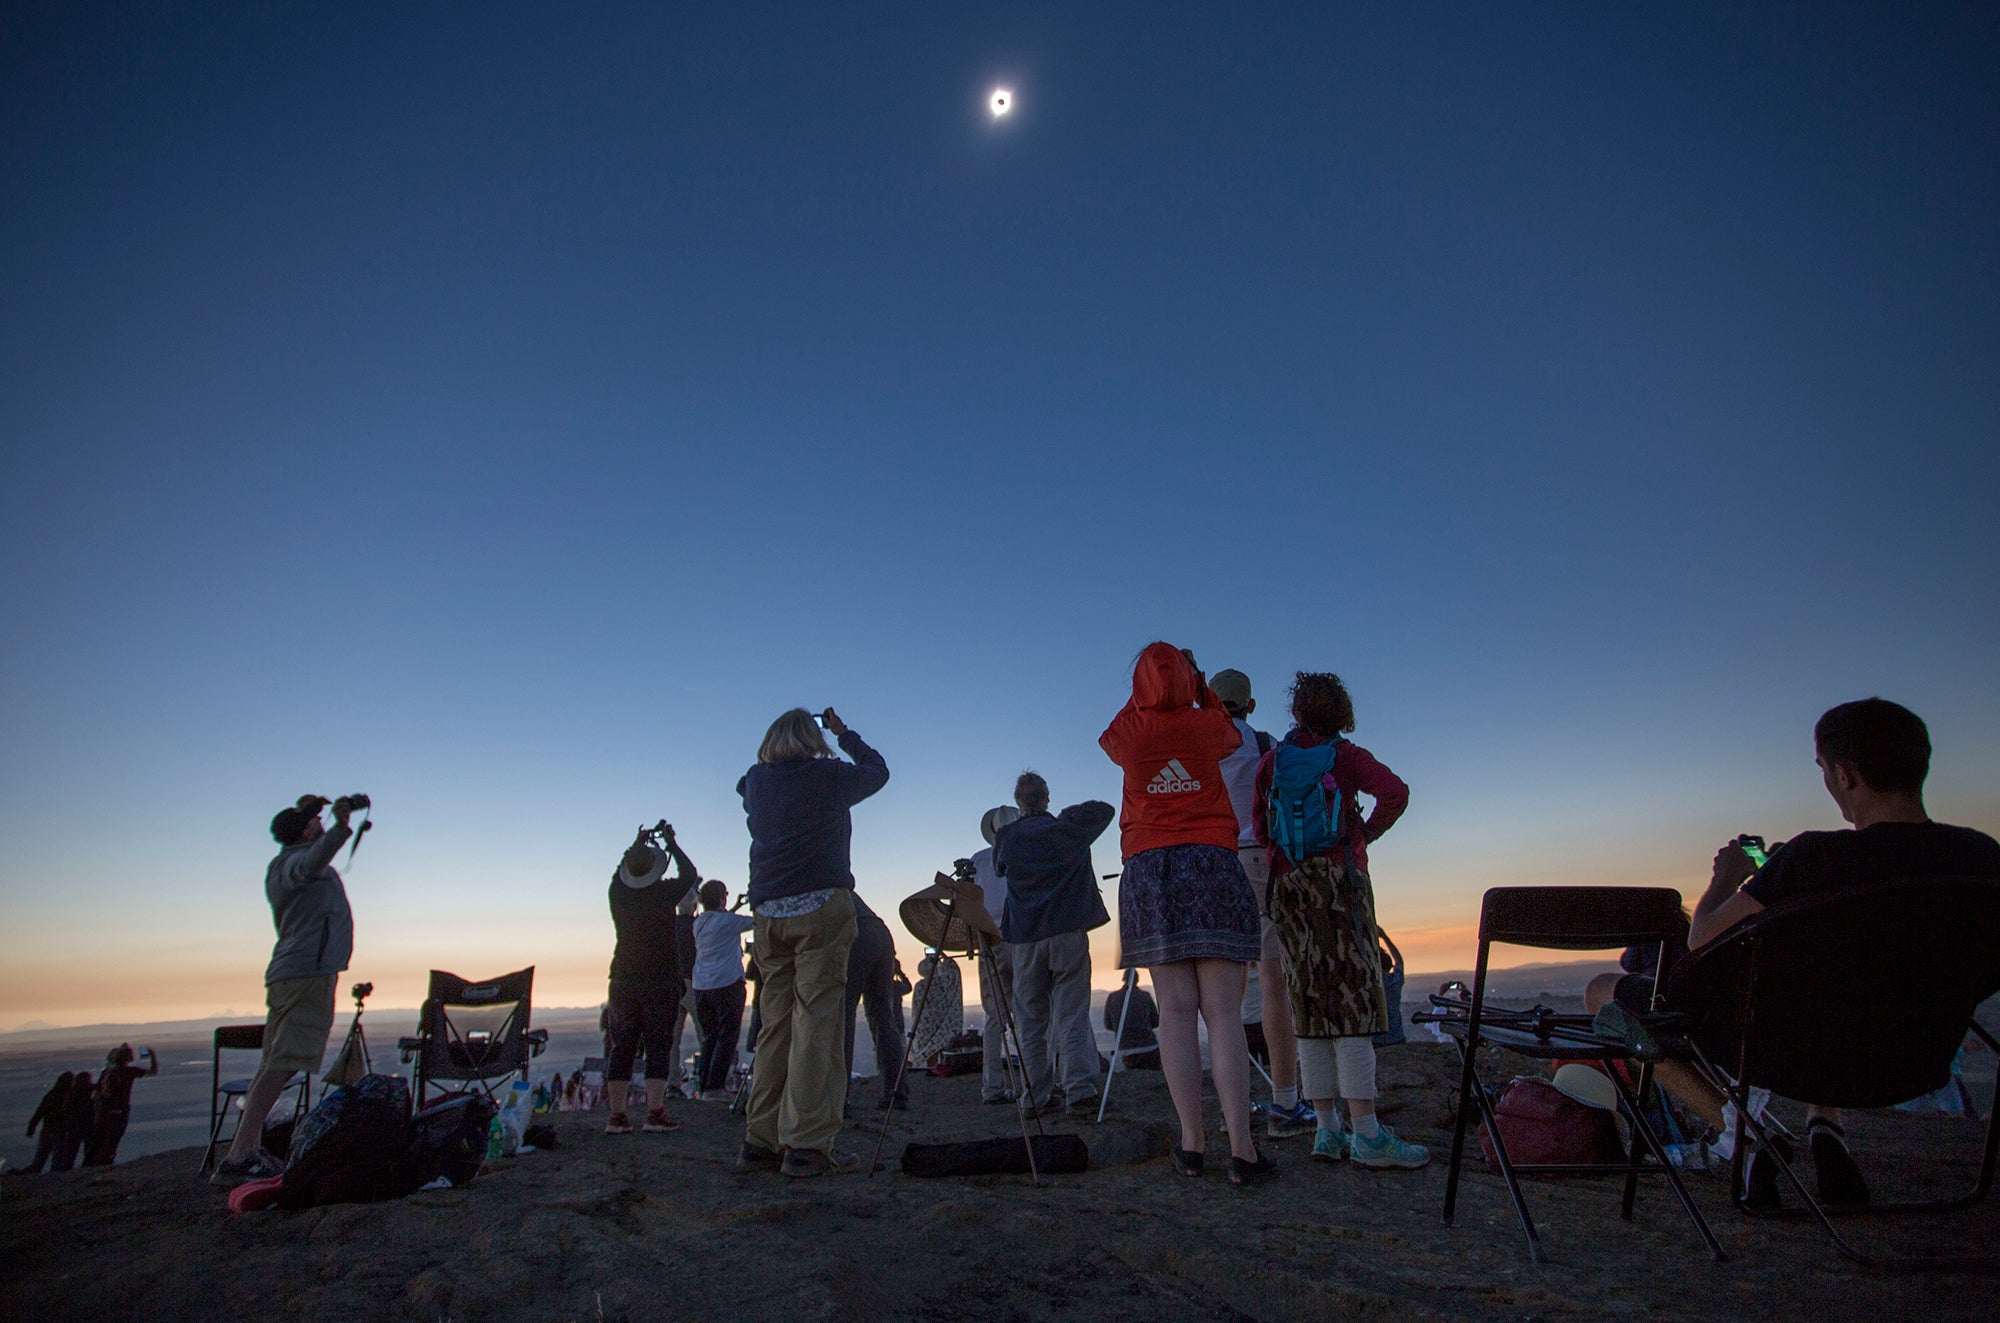 People gathered, standing as they watch a solar eclipse during totality.